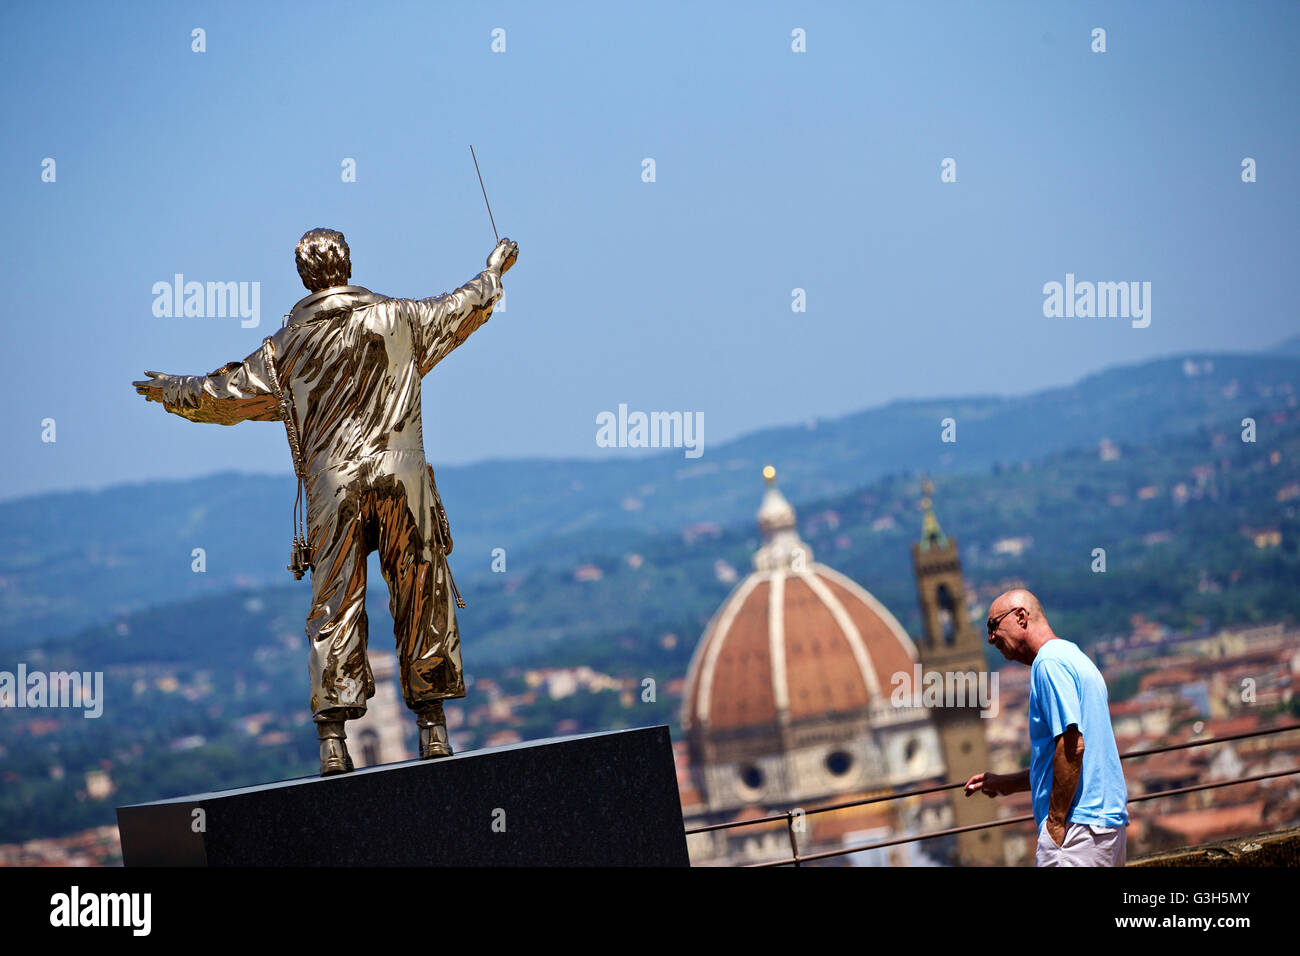 Florence, Italy. 24th June, 2016. A visitor looks at the exhibit 'The Man Who Conducts the Stars' at the Forte Belvedere in Florence, Italy, on June 24, 2016. Roughly one hundred of Belgian contemporary artist Jan Fabre's works dating from 1978 to 2016 were on display, including bronze and wax sculptures, performance films and works made of wing cases of the jewel scarab. © Jin Yu/Xinhua/Alamy Live News Stock Photo